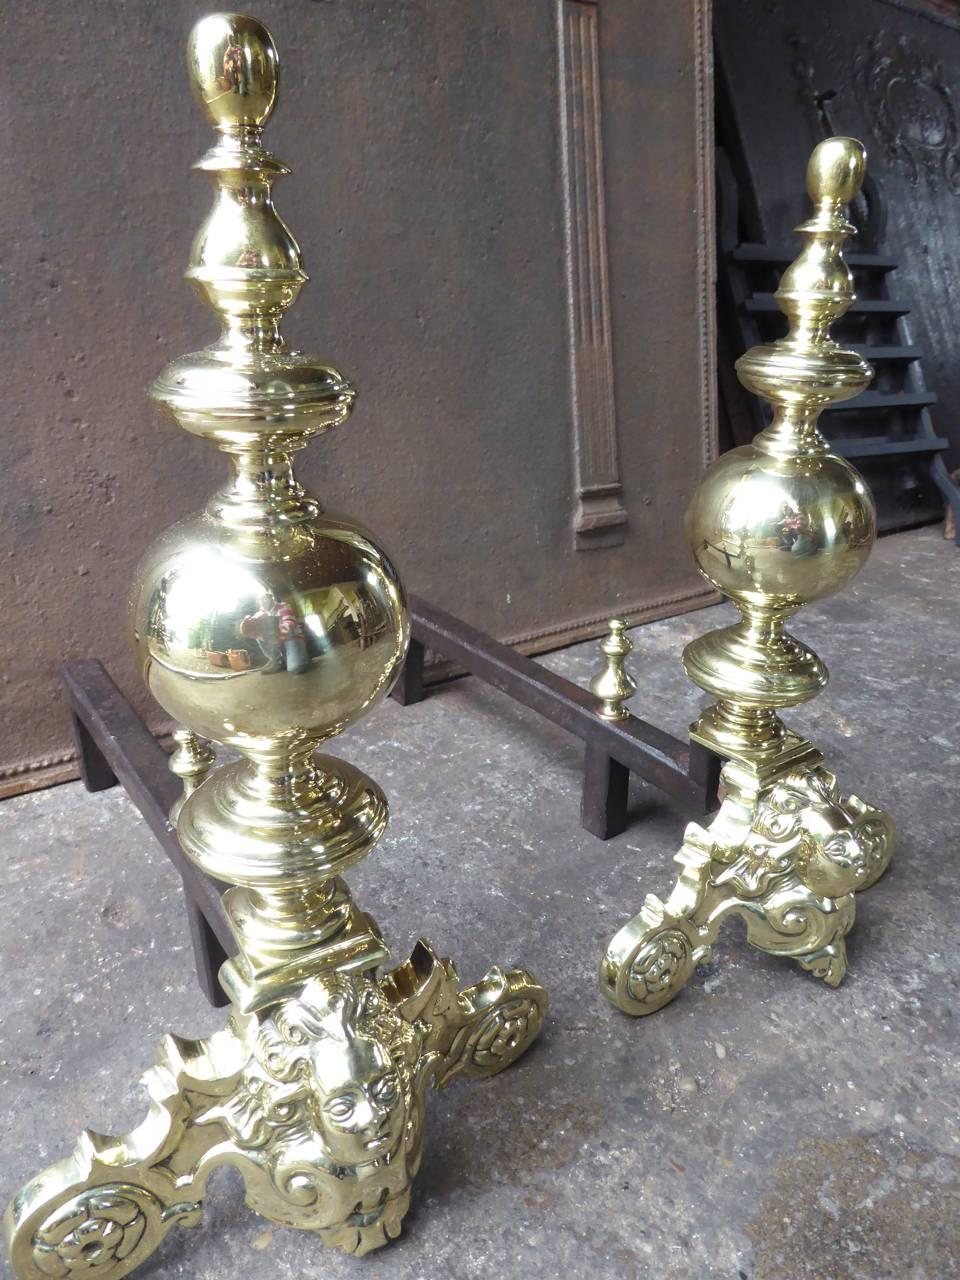 Polished 19th Century Louis XIV Style Firedogs or Andirons